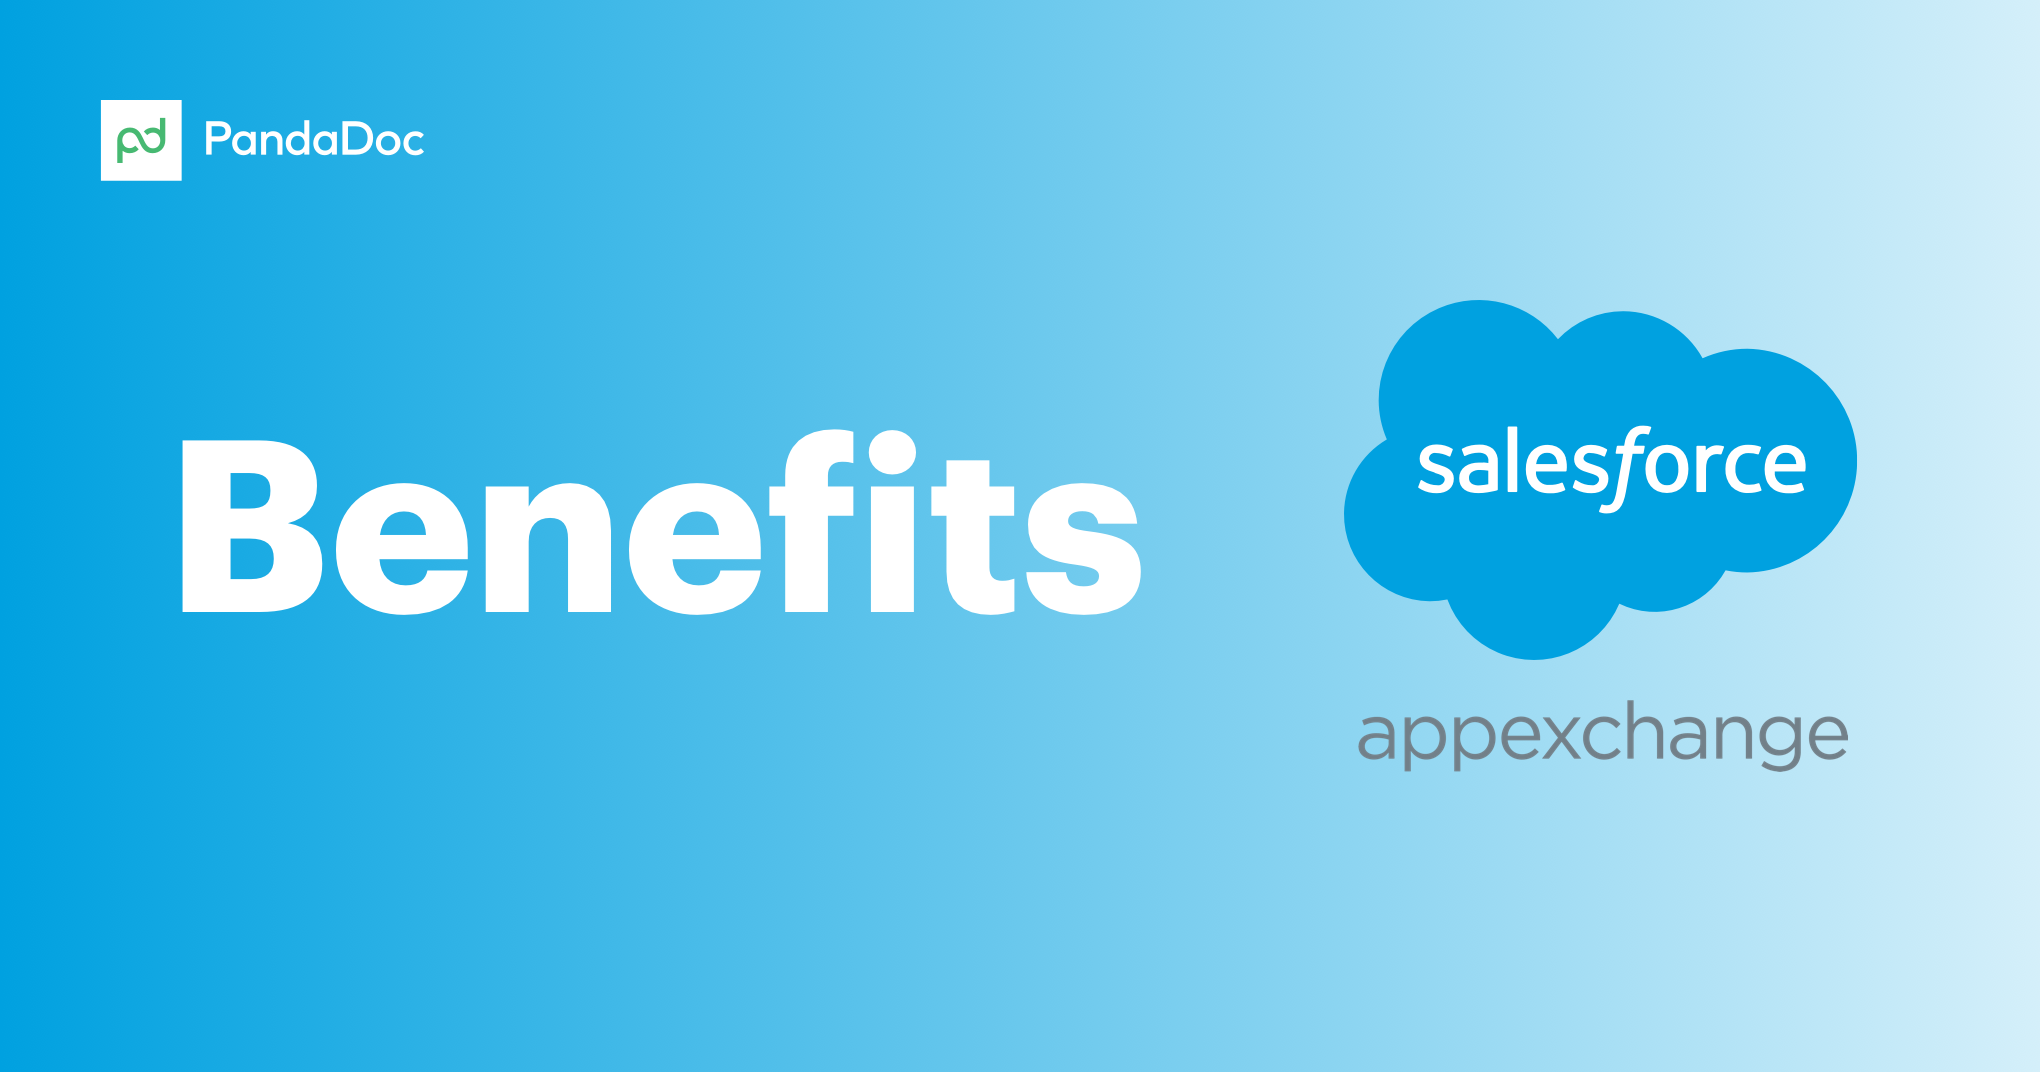 The benefits of the Salesforce AppExchange for SMB and enterprise businesses